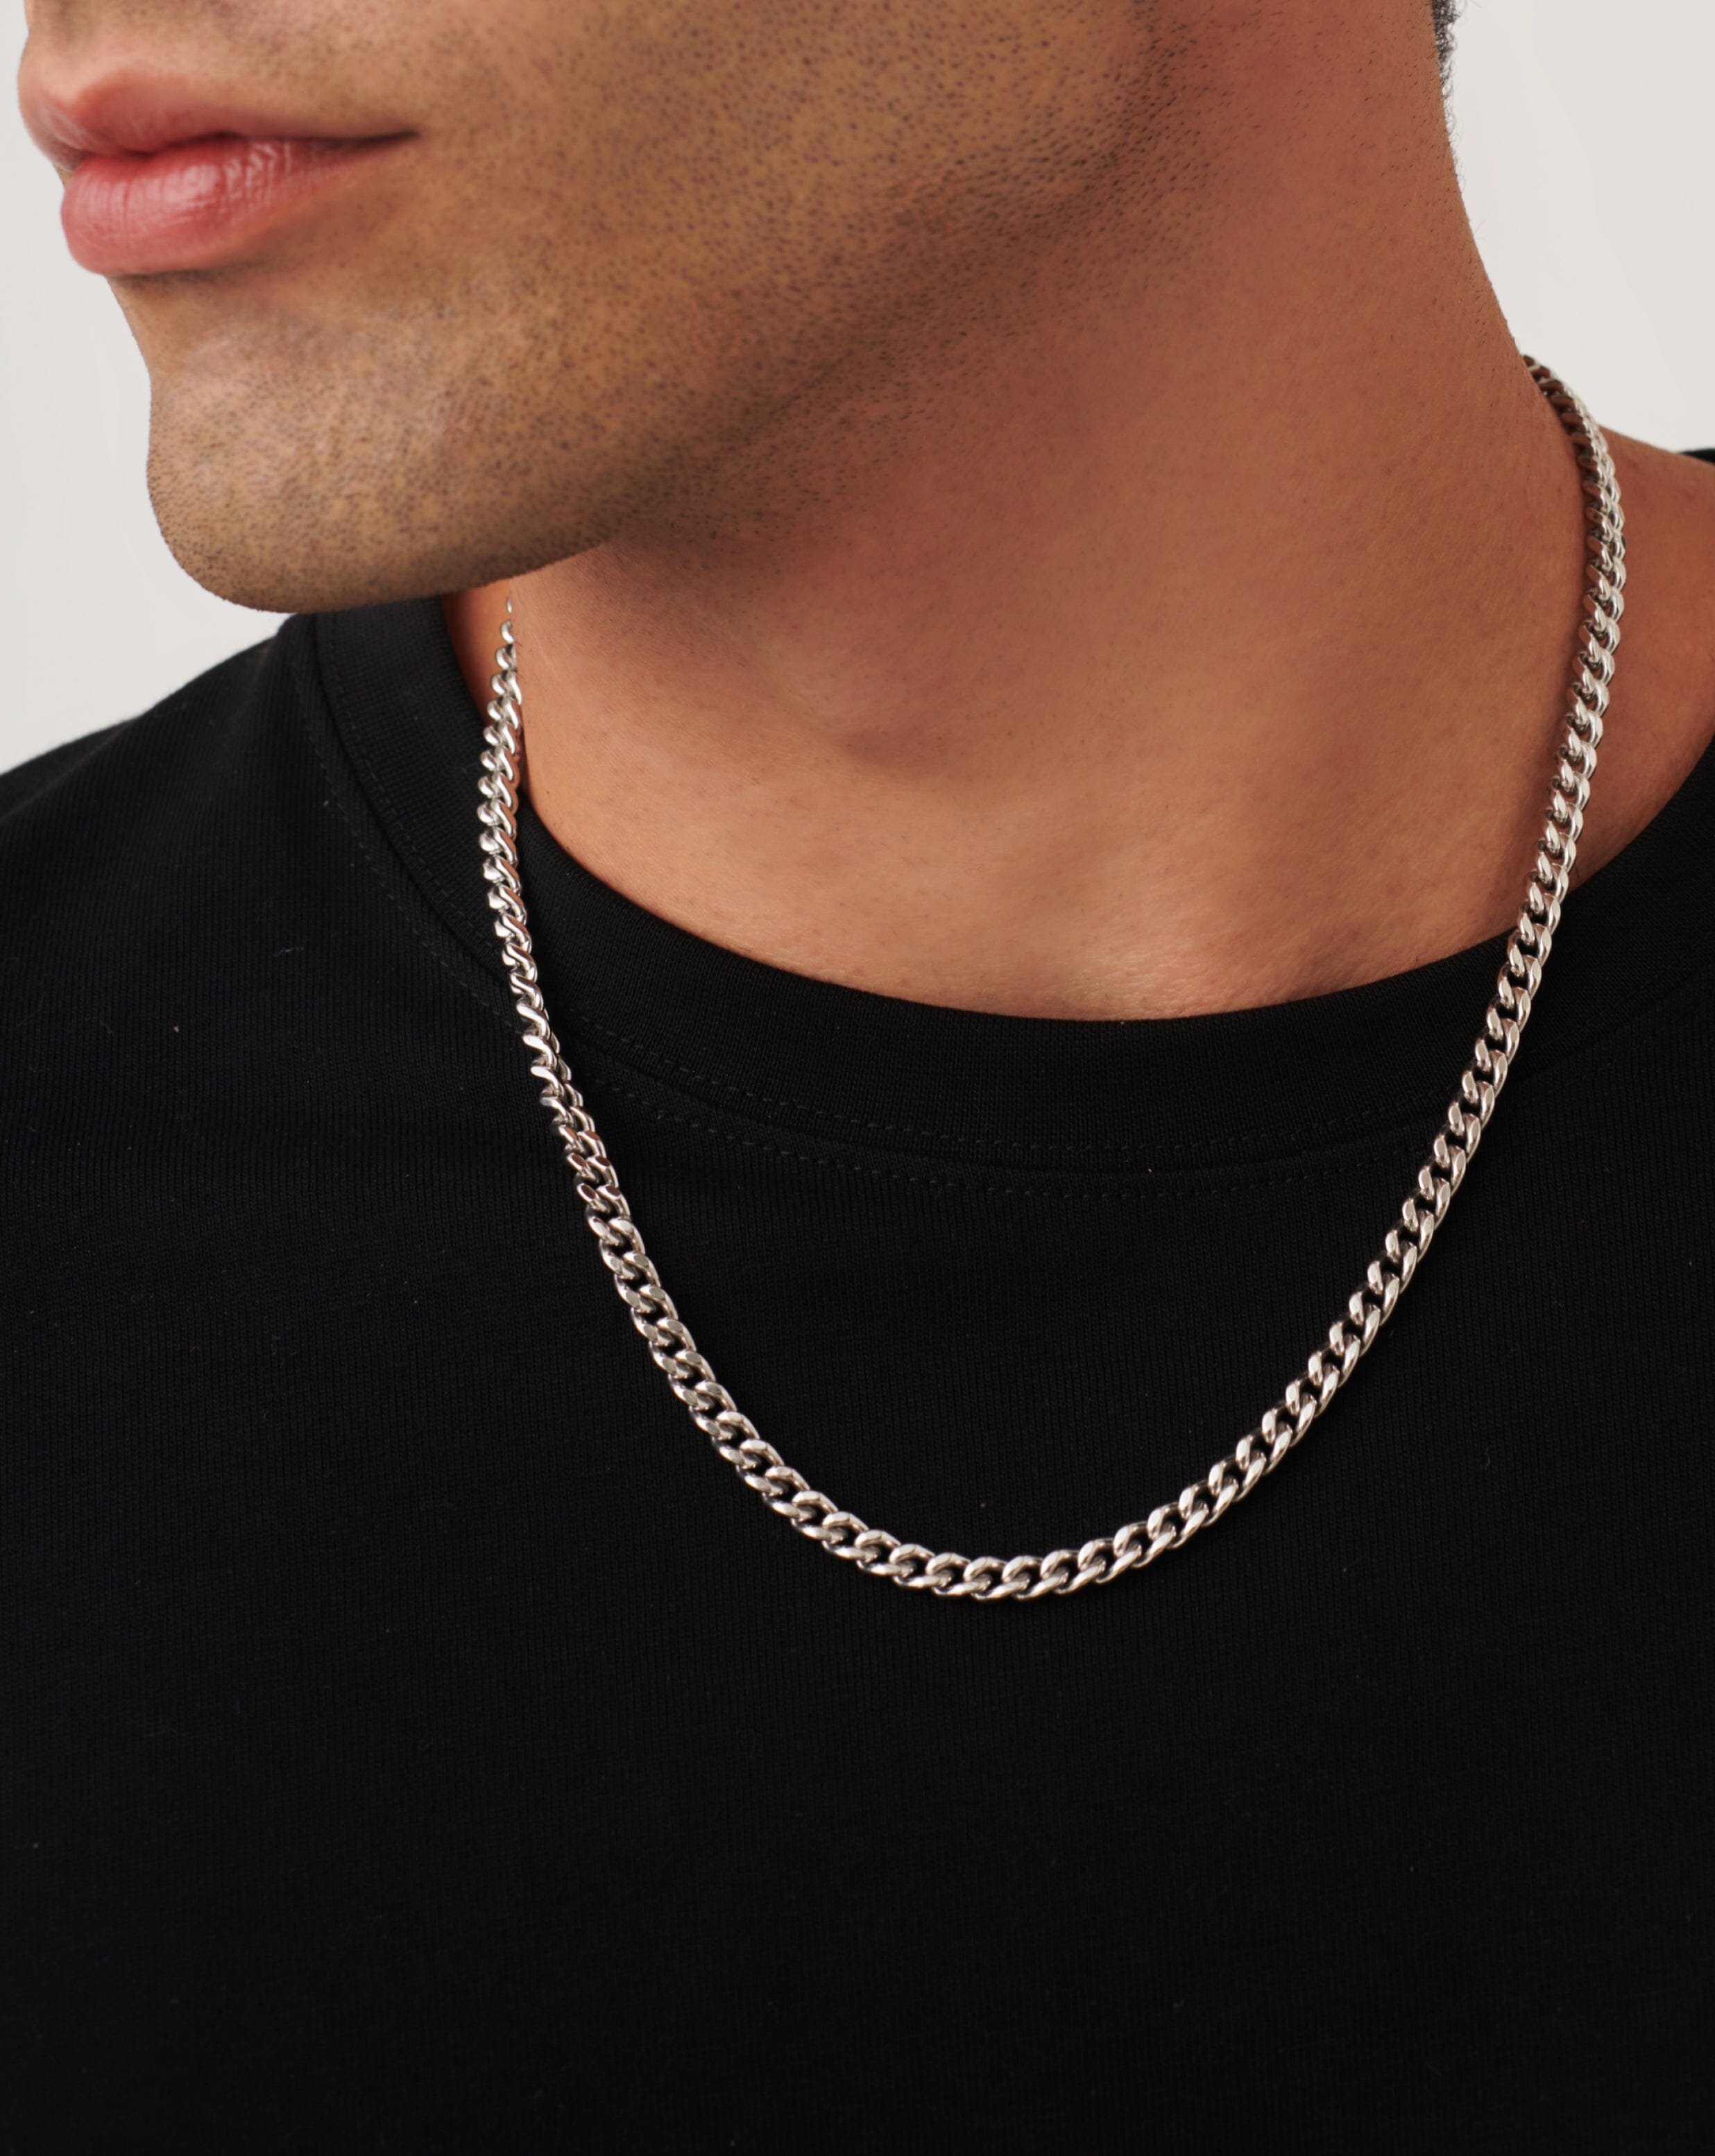 The Black Bow Men's 8.5mm Sterling Silver Solid Flat Curb Chain Necklace,  18 Inch | Amazon.com